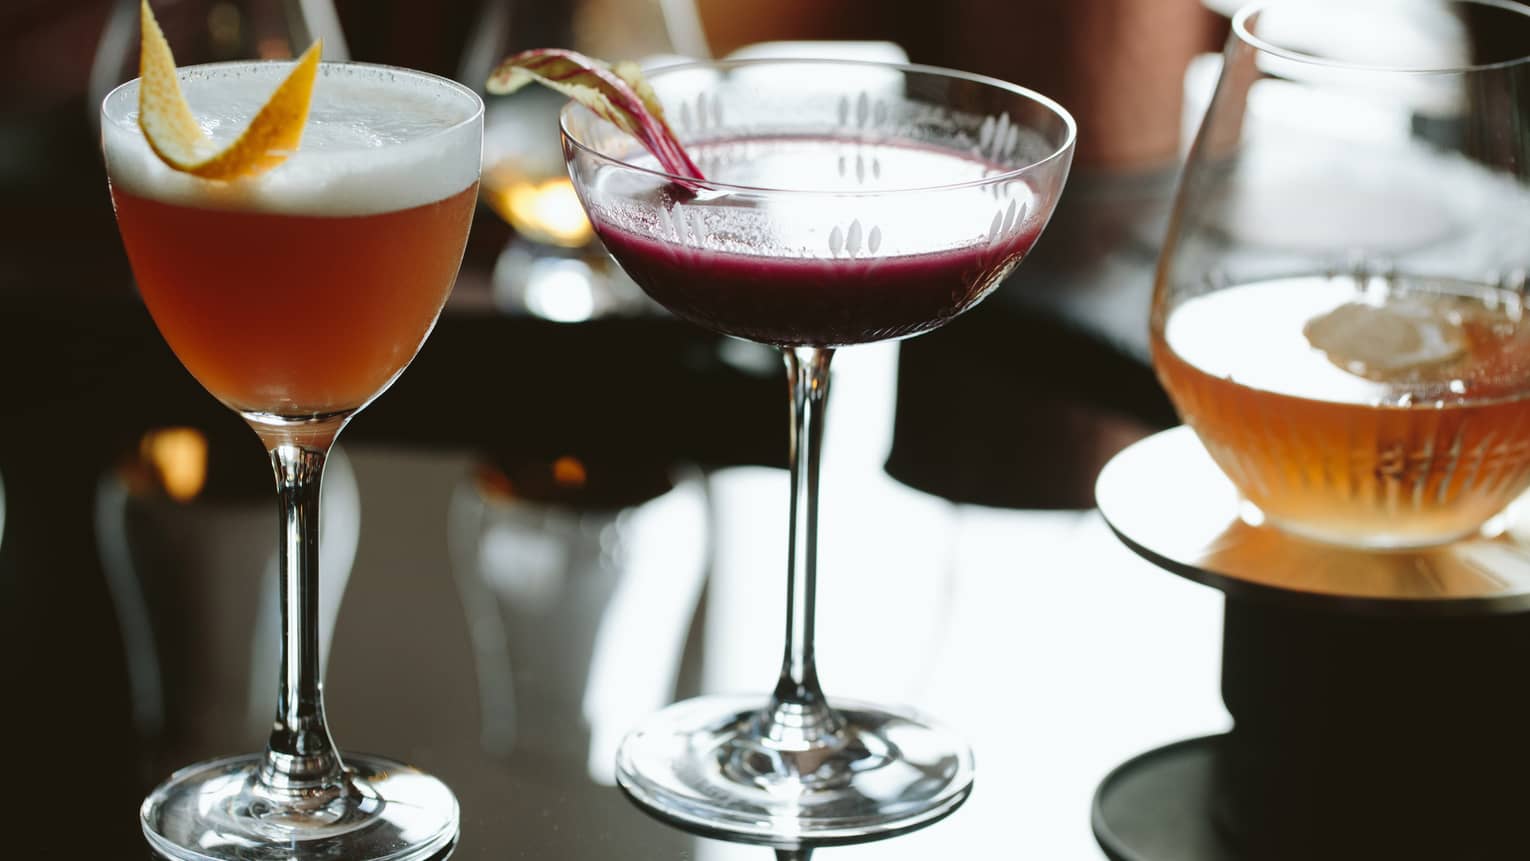 Three gourmet fall cocktails in glasses with rind garnishes 